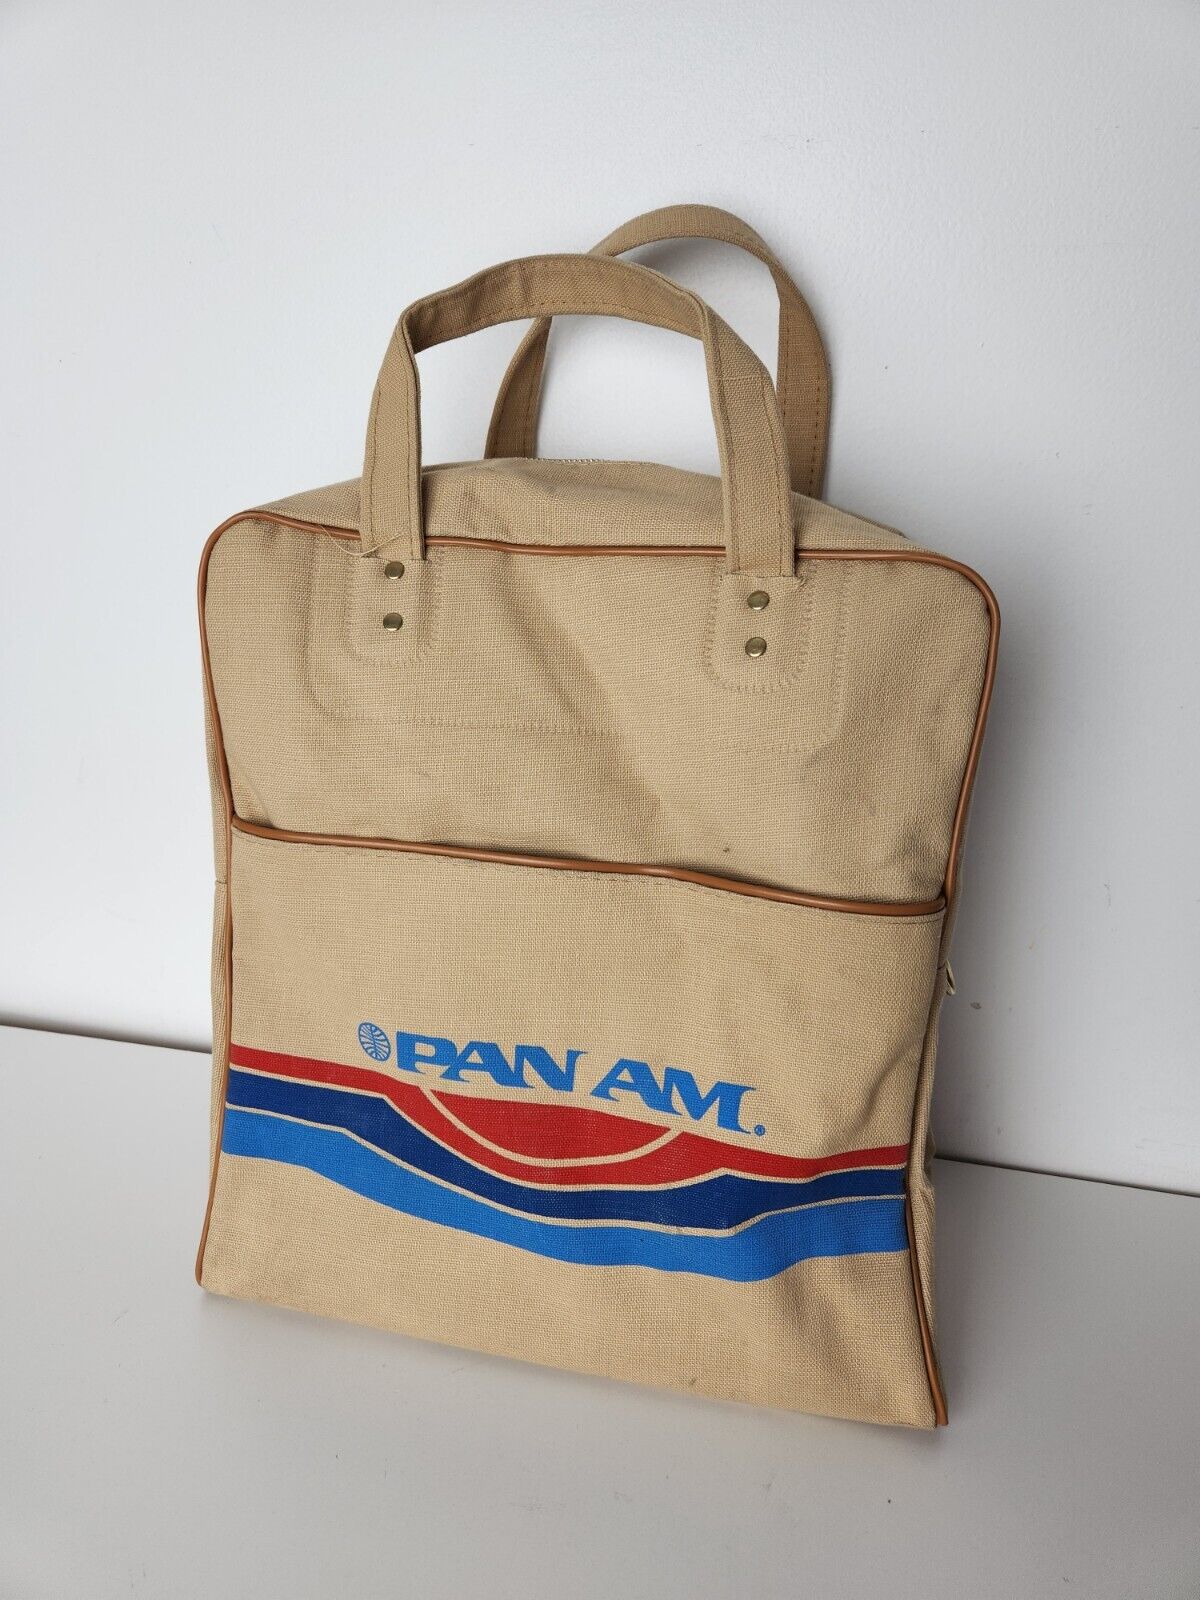 Pan Am Airlines Yamaha Logo Carry On Cross Body Travel Flight Bag Tote Vtg 80s